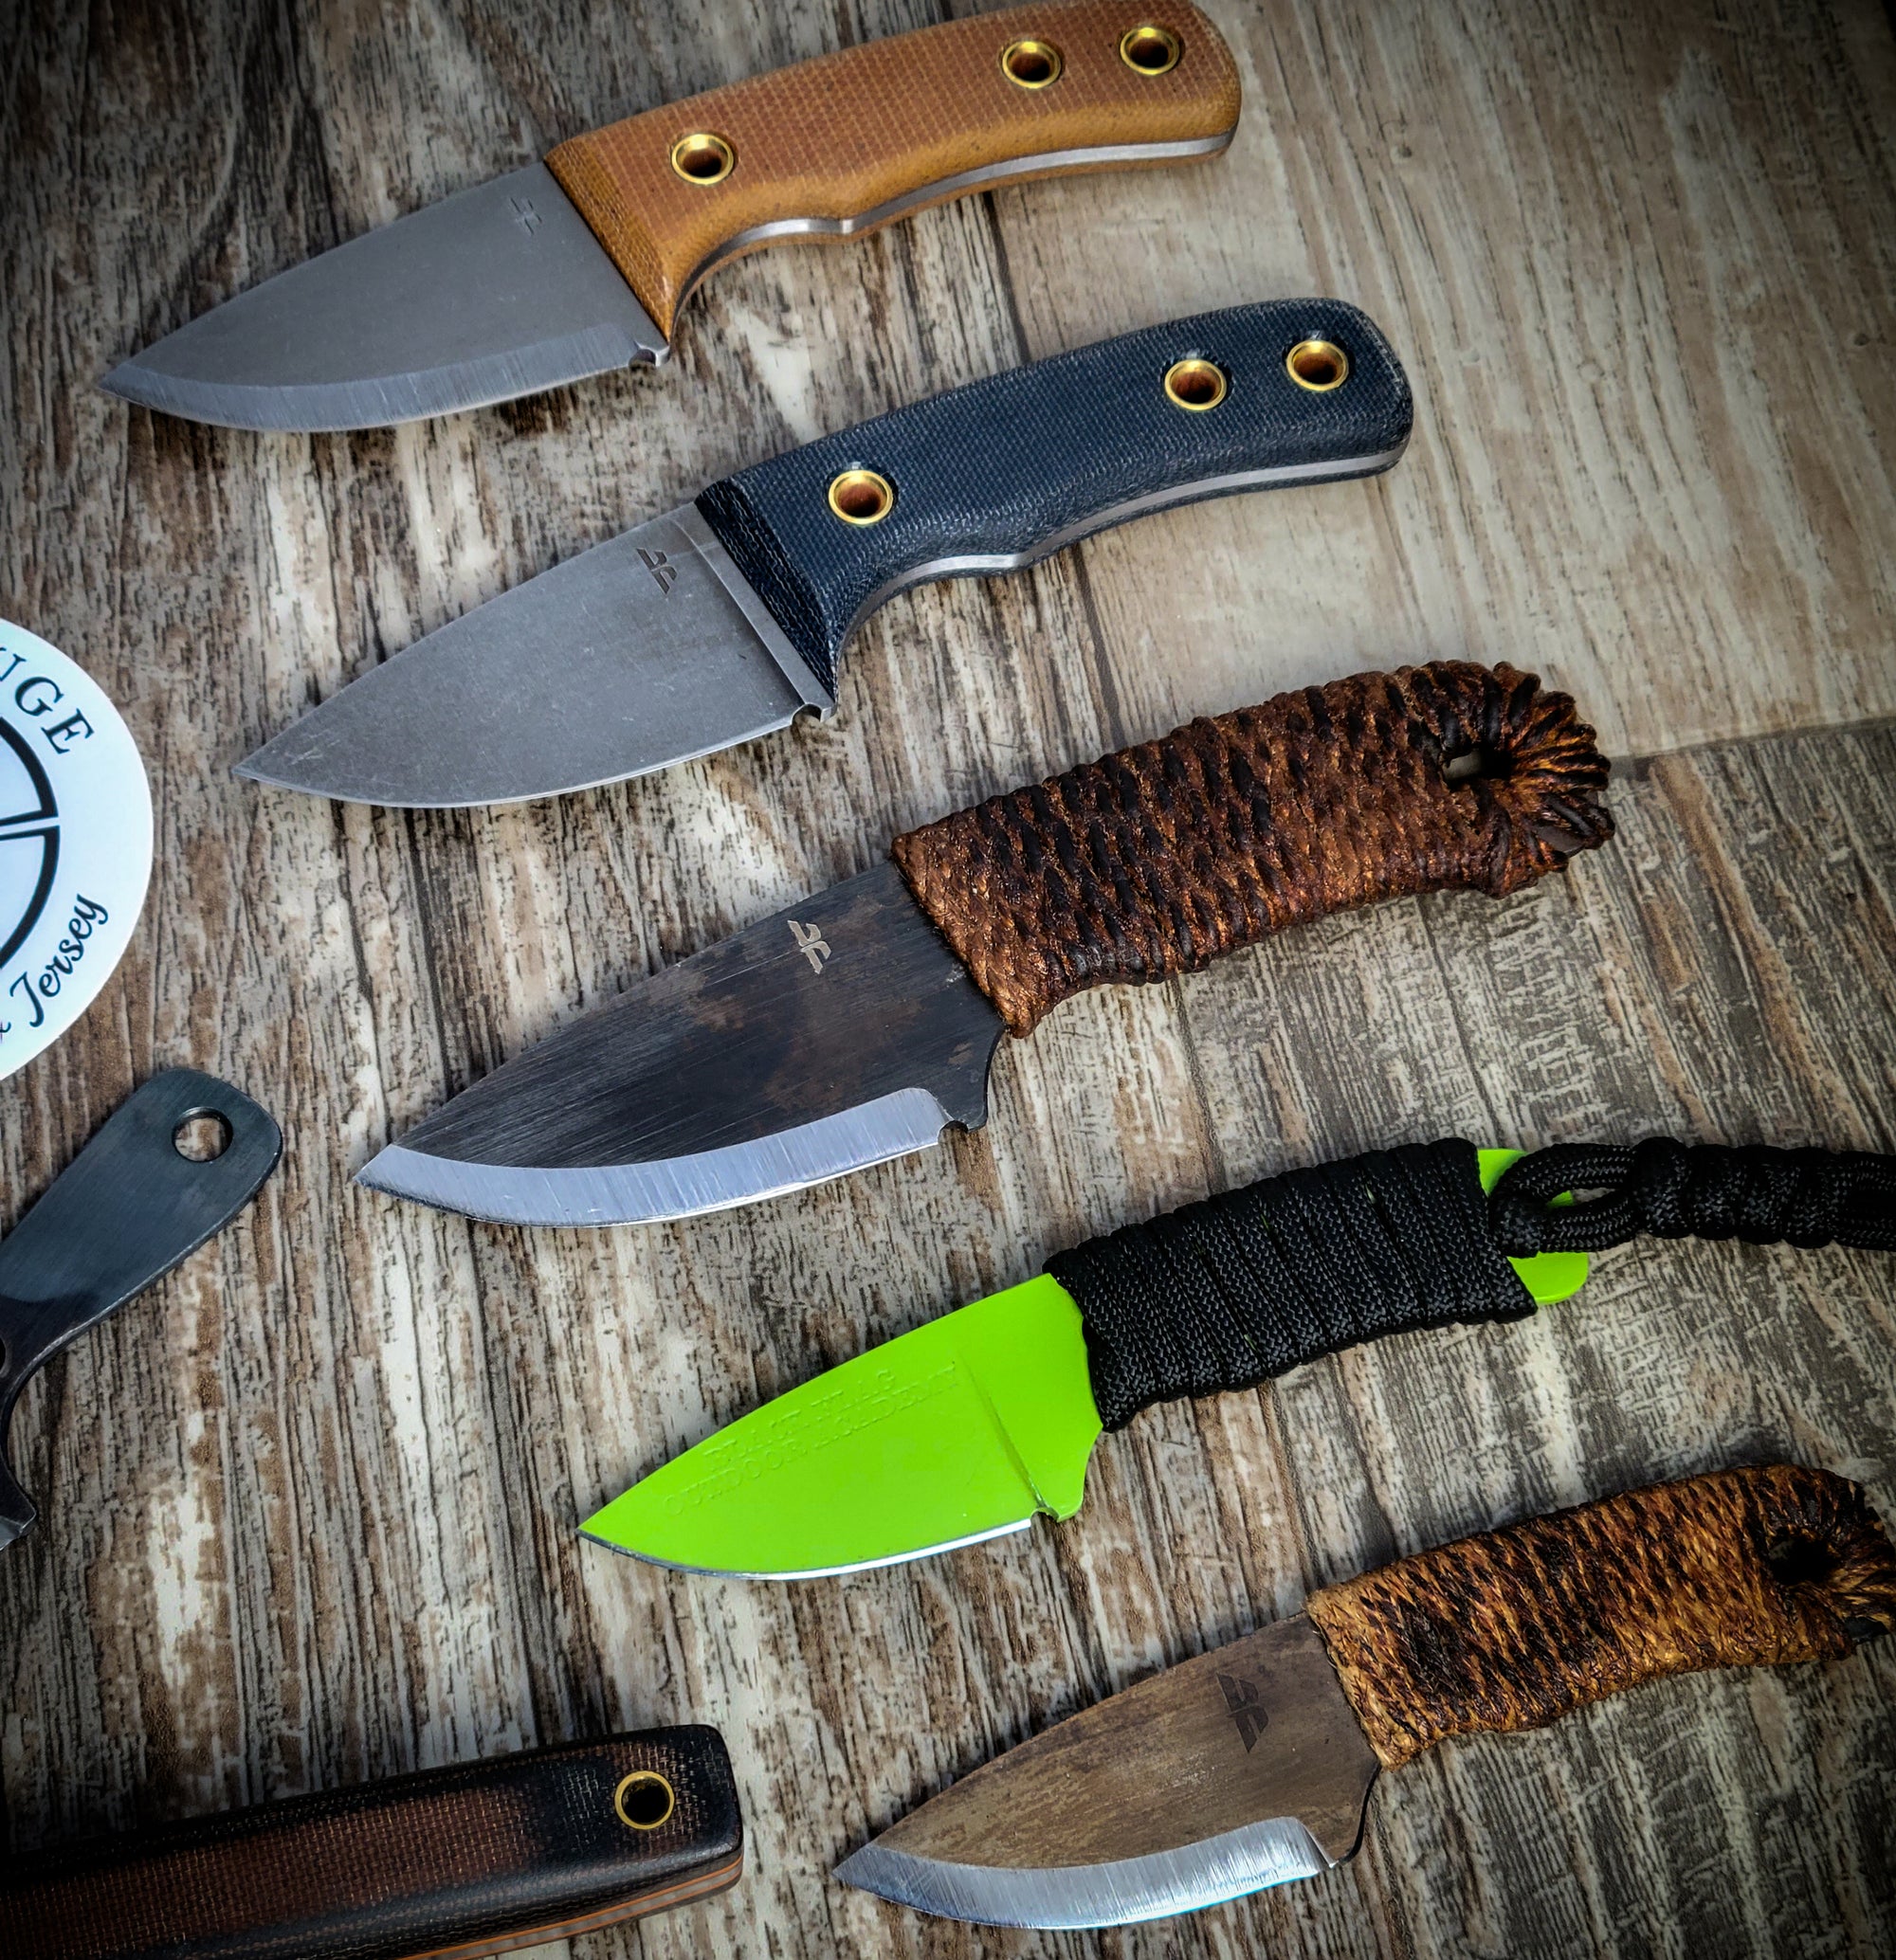 KPL Maker Feature: Knives by Nuge